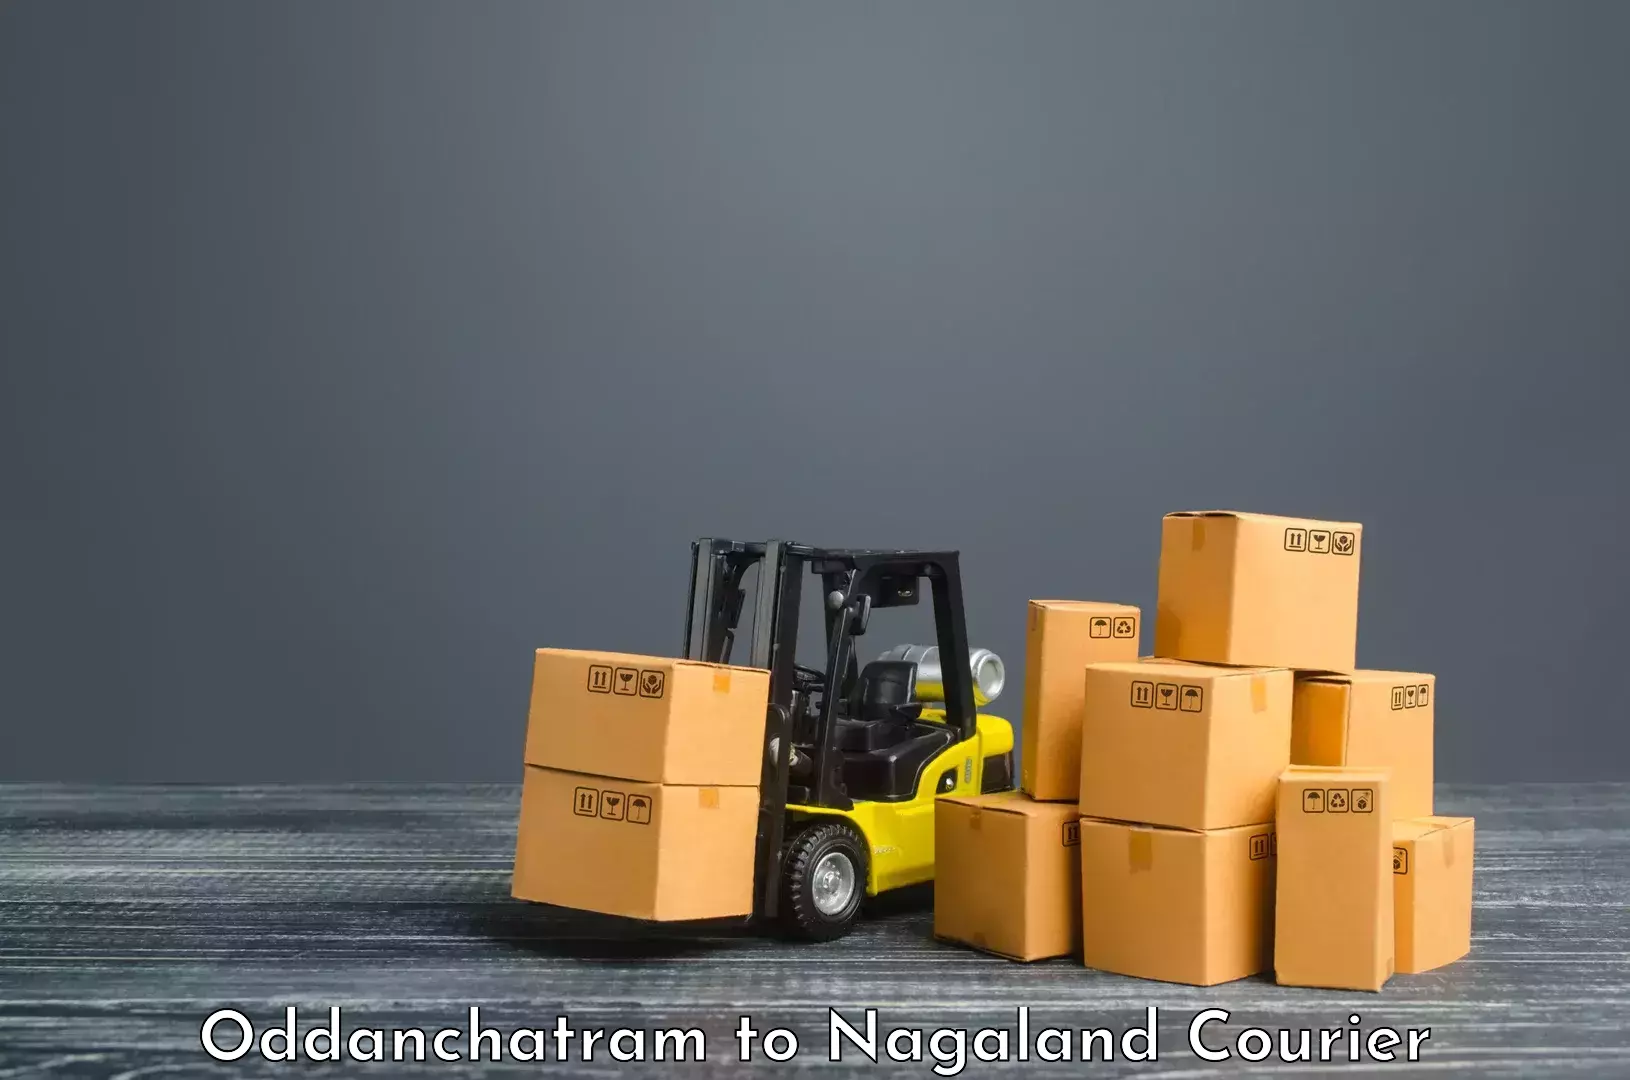 Quality courier partnerships Oddanchatram to NIT Nagaland